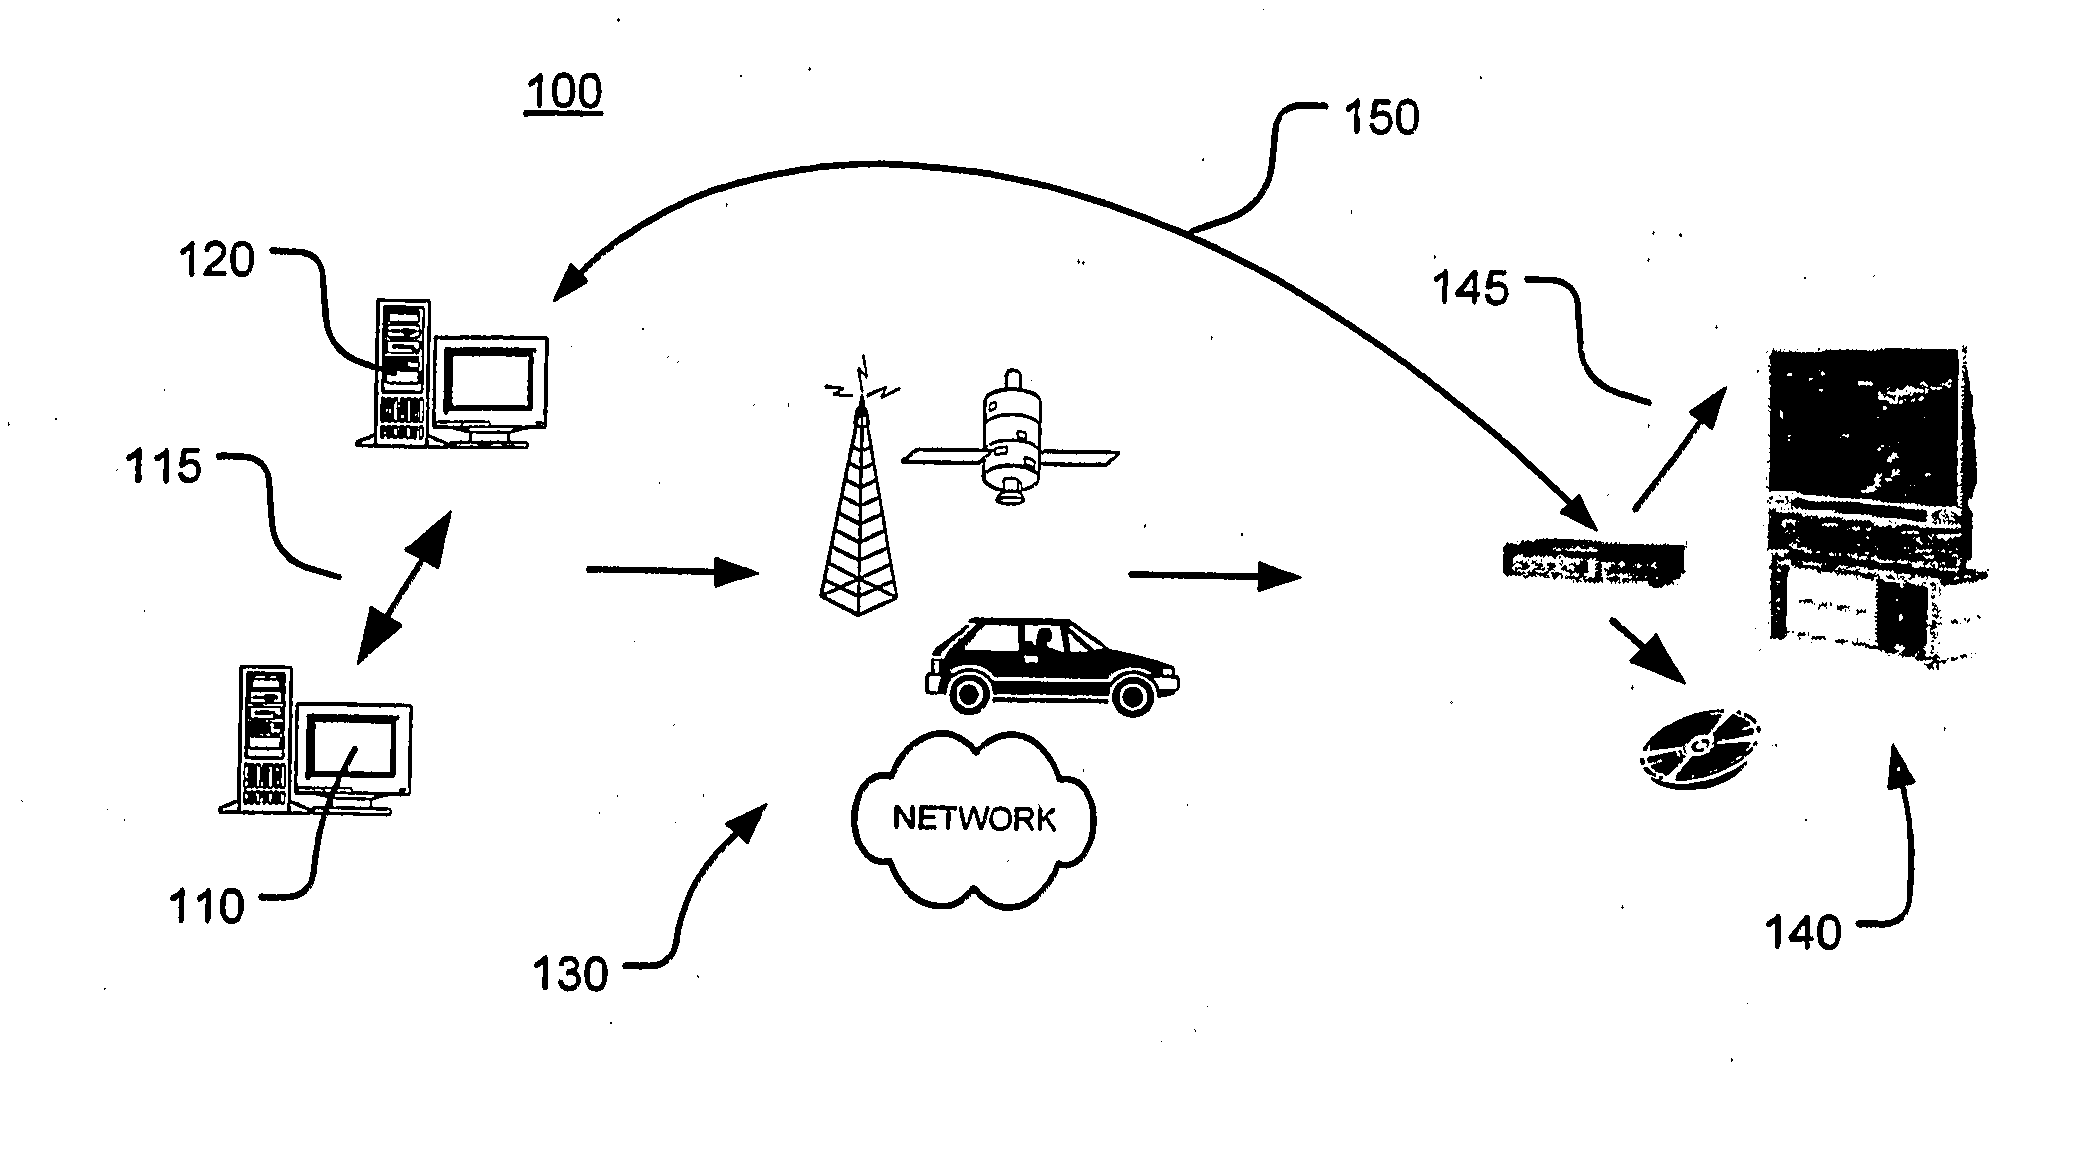 Method And System For Selectively Providing Access To Content